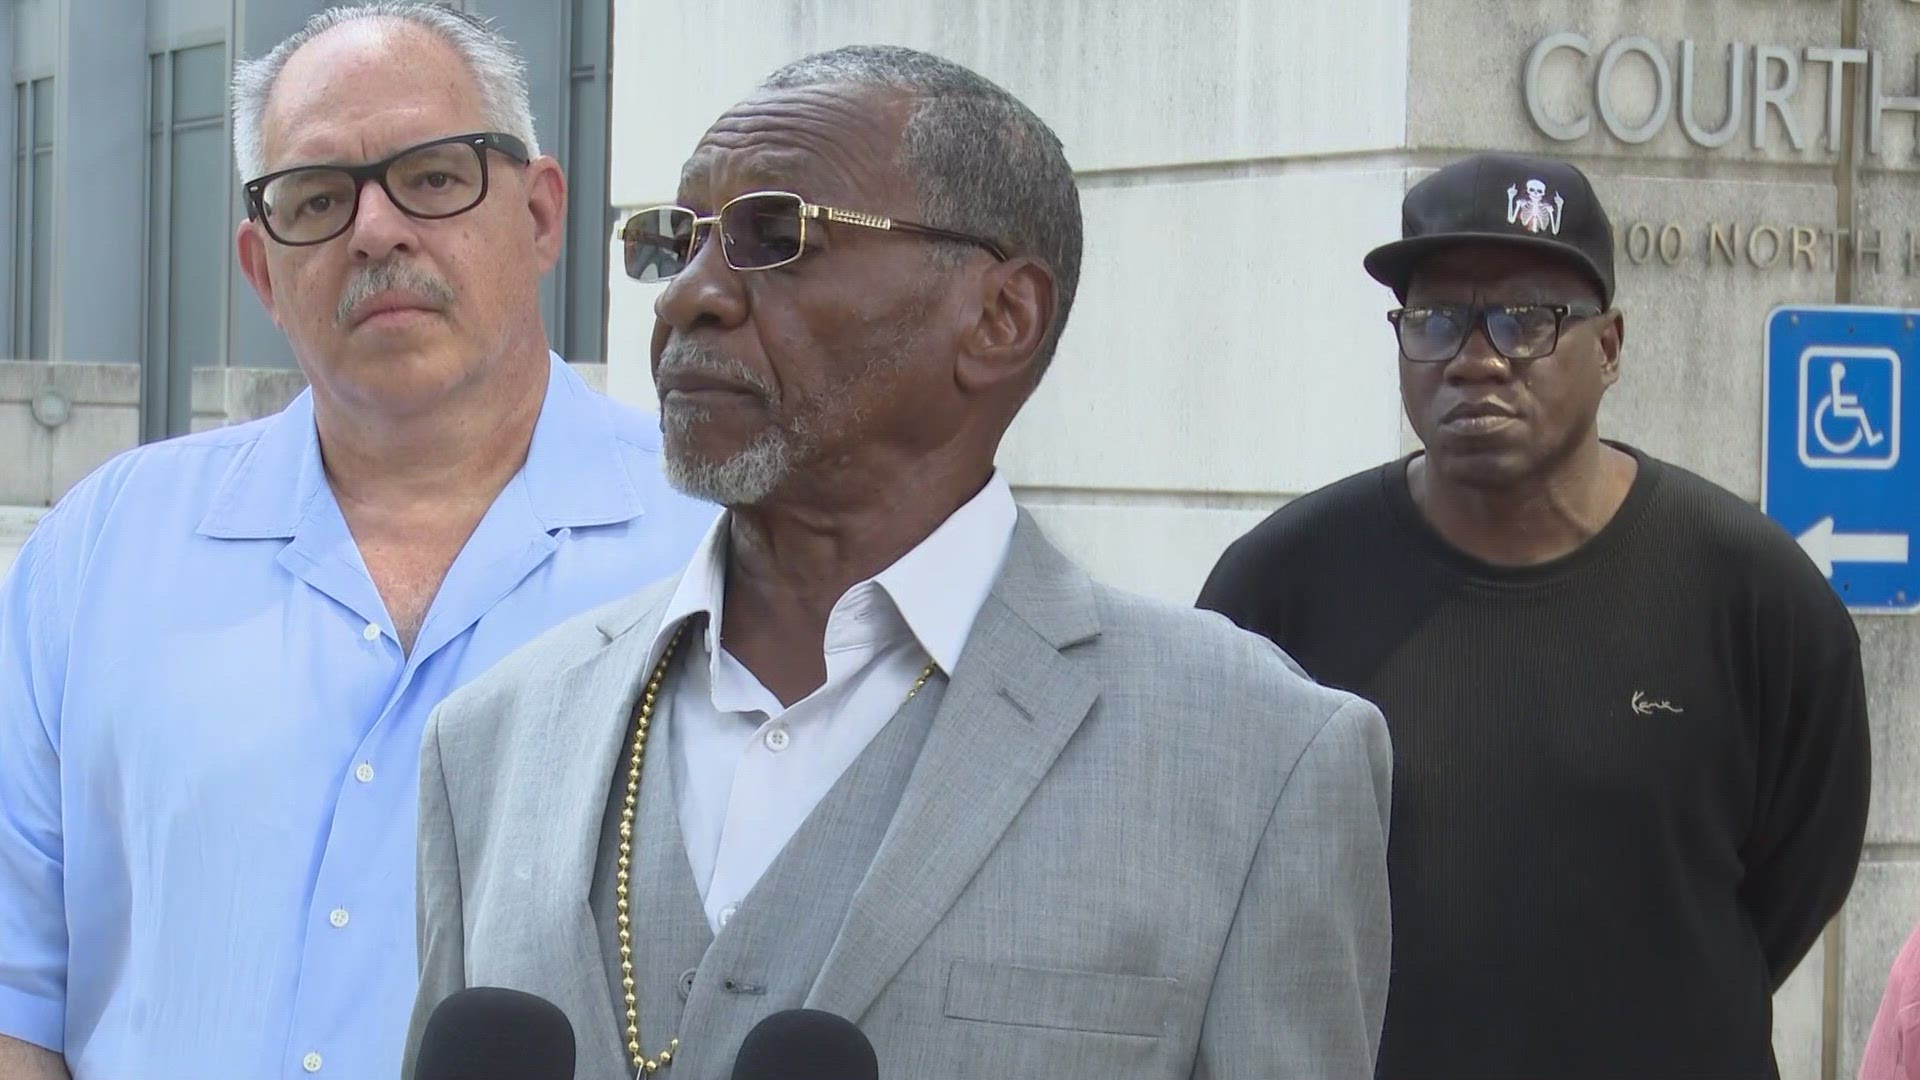 Willie Williams is bringing a lawsuit against the city, county and sheriff's office. He says he endured 'slave-like' labor during his 44 years wrongfully imprisoned.